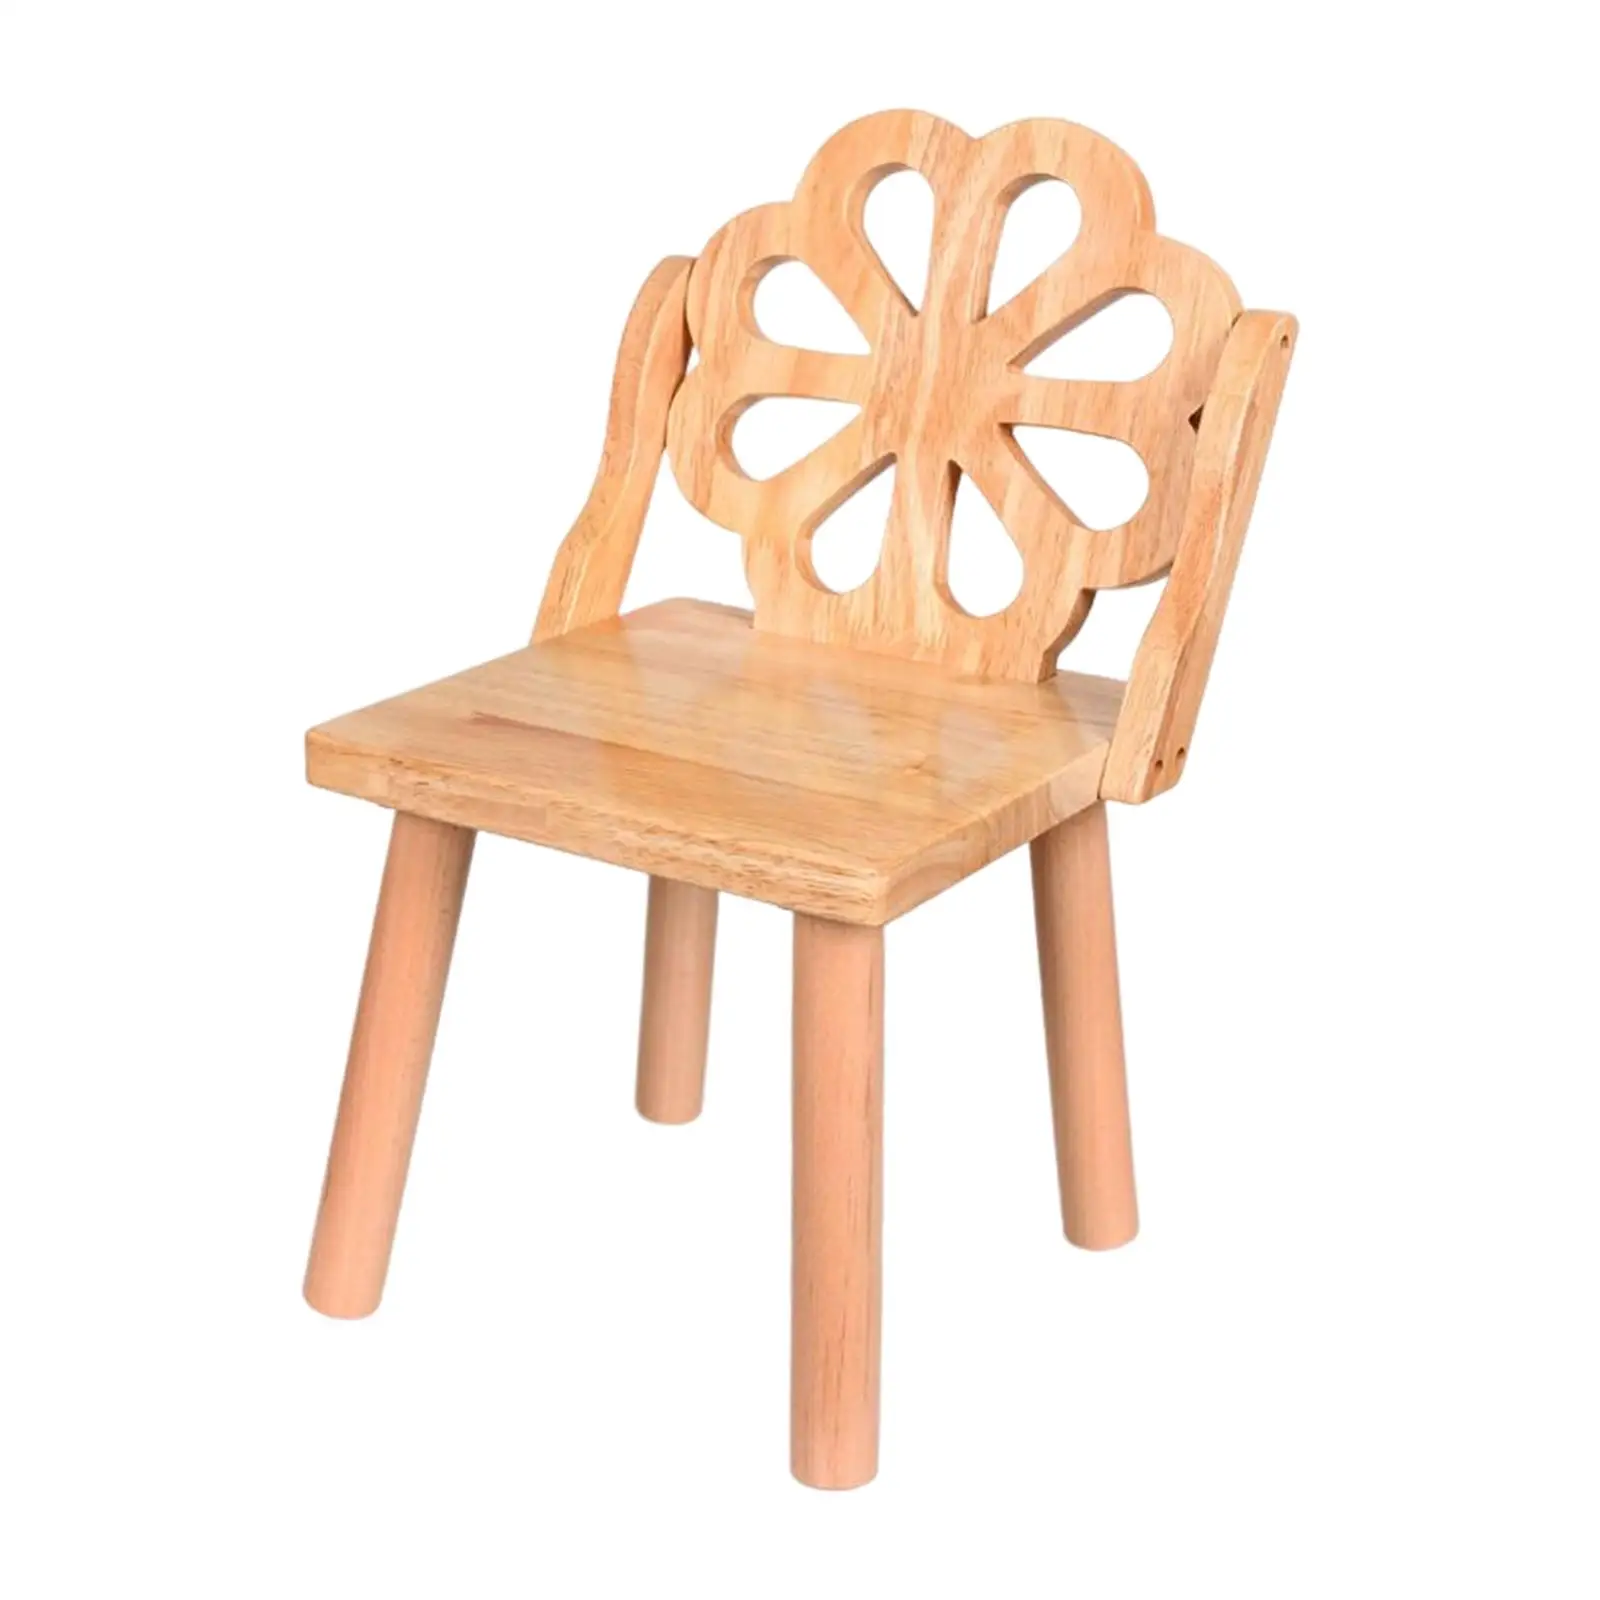 Household Removable Wooden Child Stool Heavy Duty Lightweight Durable Wood